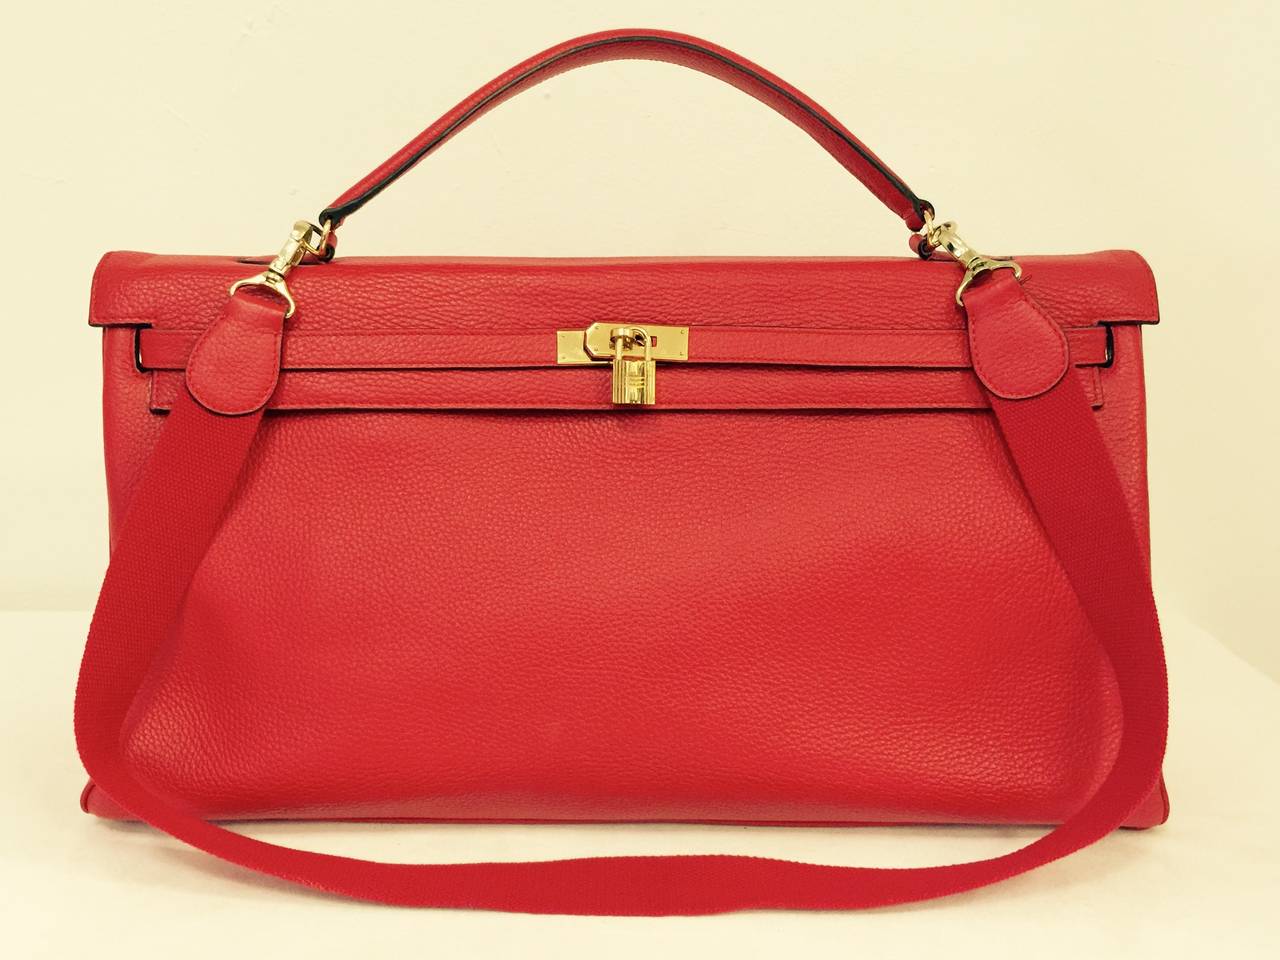 No wonder Grace Kelly fell in love with this quintessential Hermes design in 1954!  Officially named after Her Serene Highness in 1977, this largest version of the 